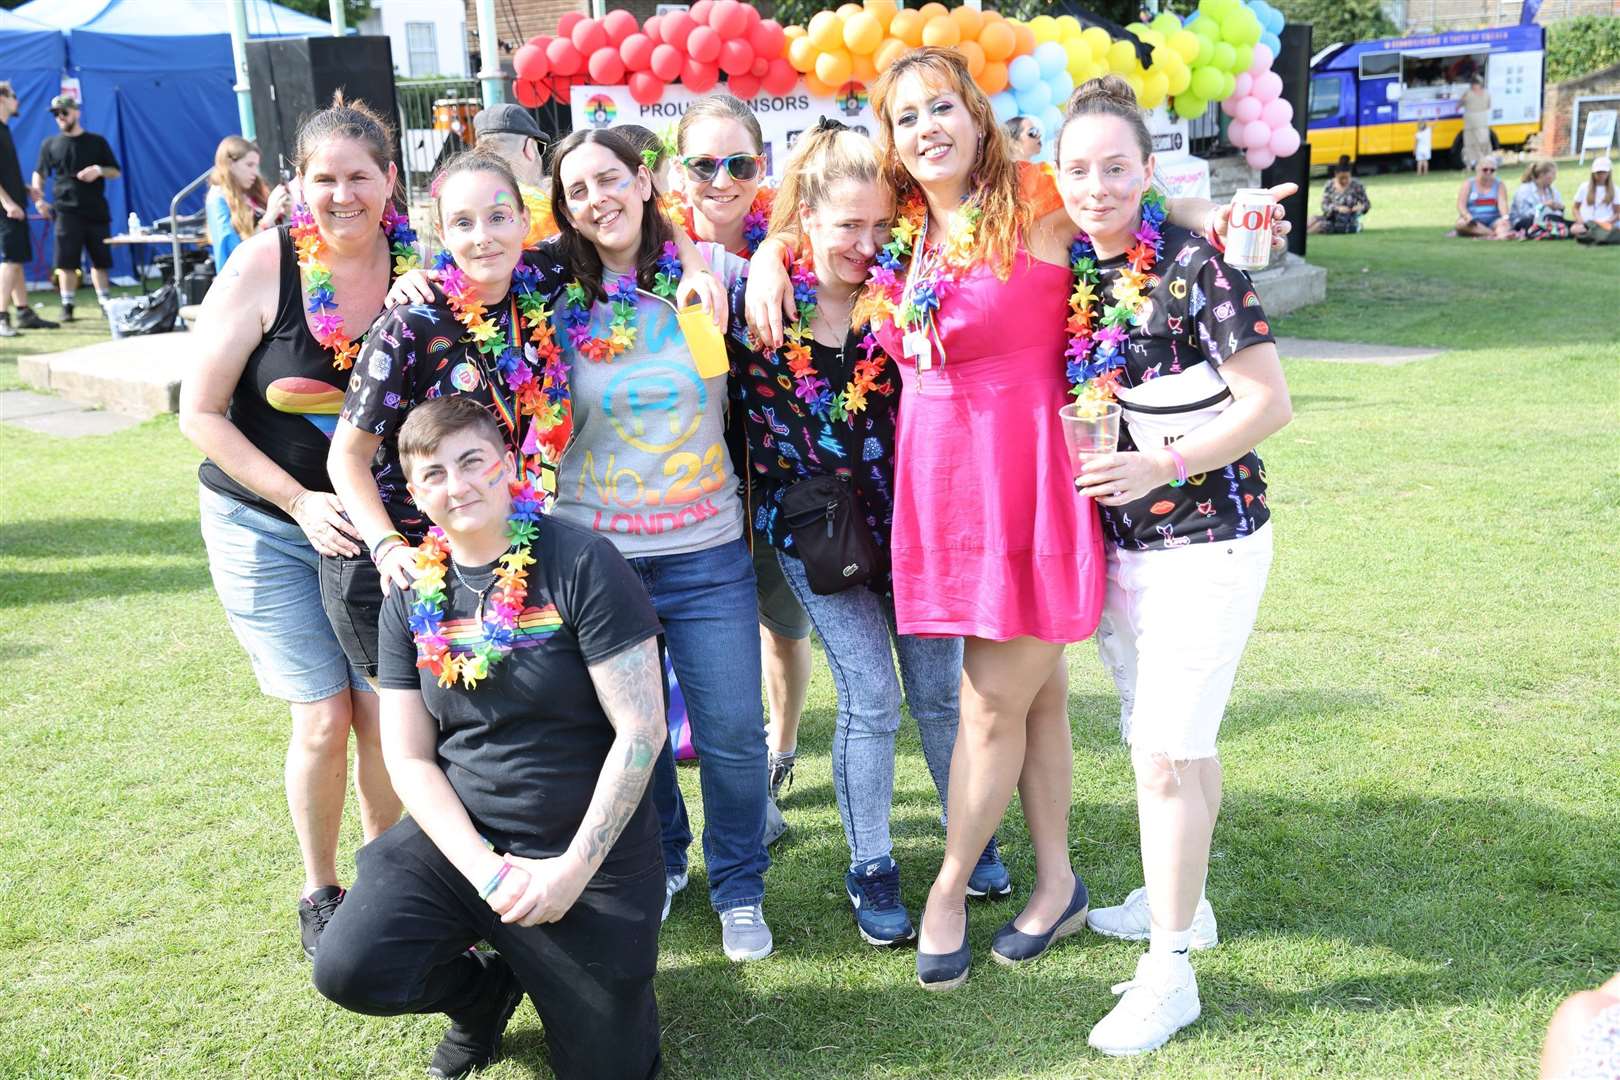 Locals enjoy Gravesham's first physical Pride event. Photo: Cohesion Plus